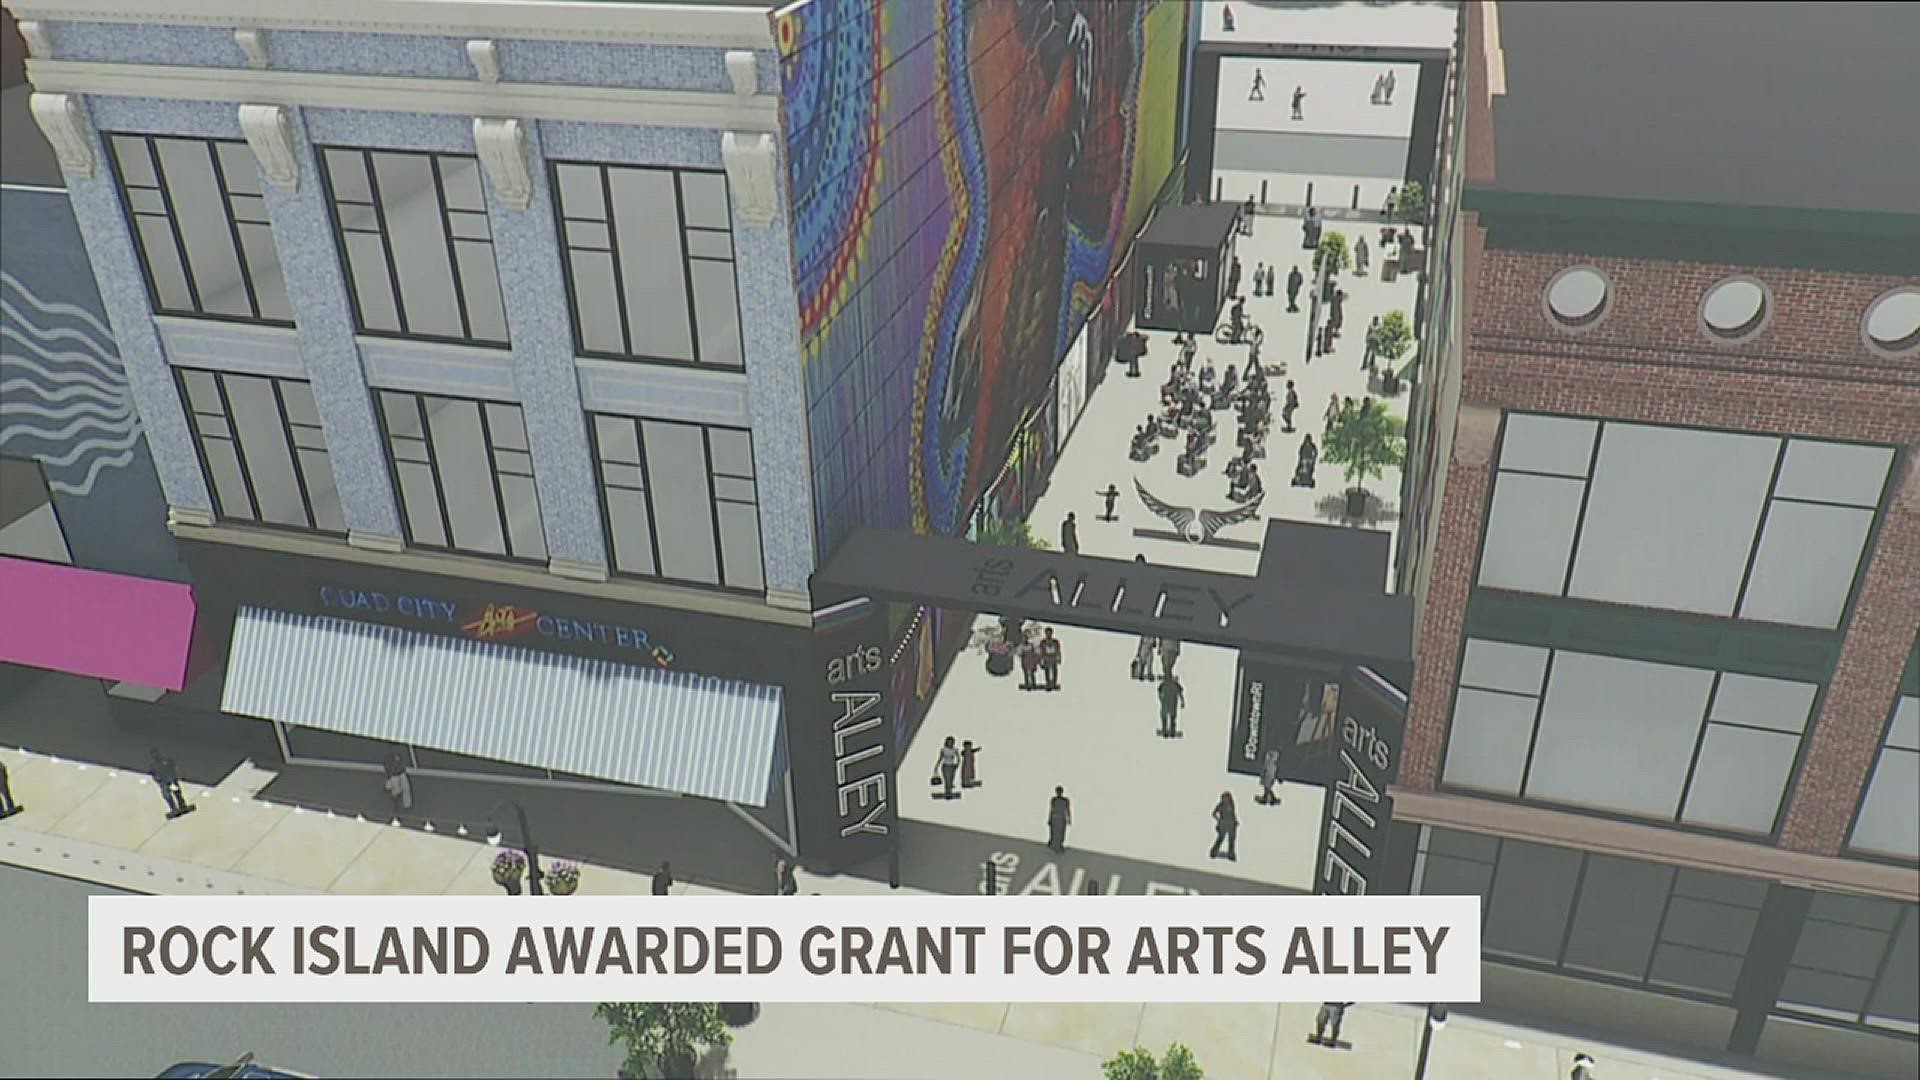 The State of Illinois awarded the QC Chamber and City of Rock Island the grant to help turn Arts Alley into an urban art gallery, event venue and family destination.